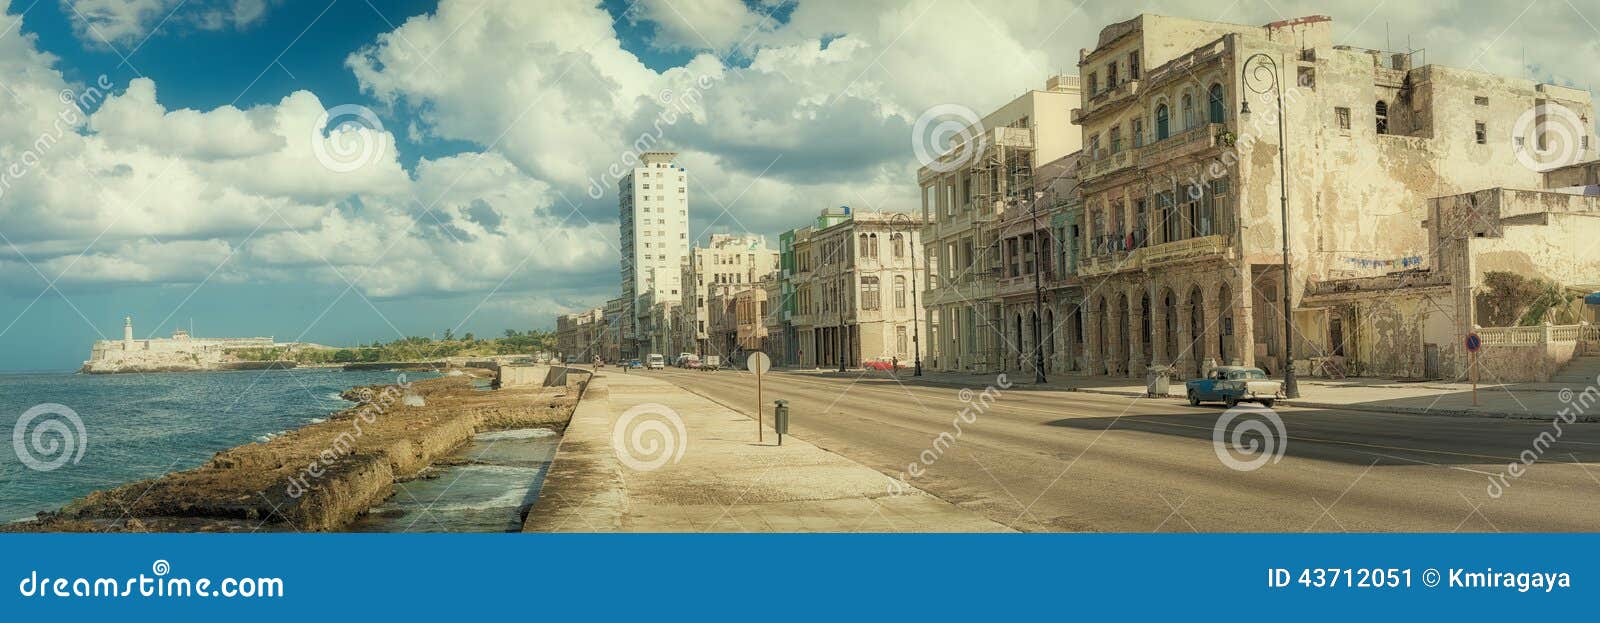 old havana with ancient buildings and el morro castle